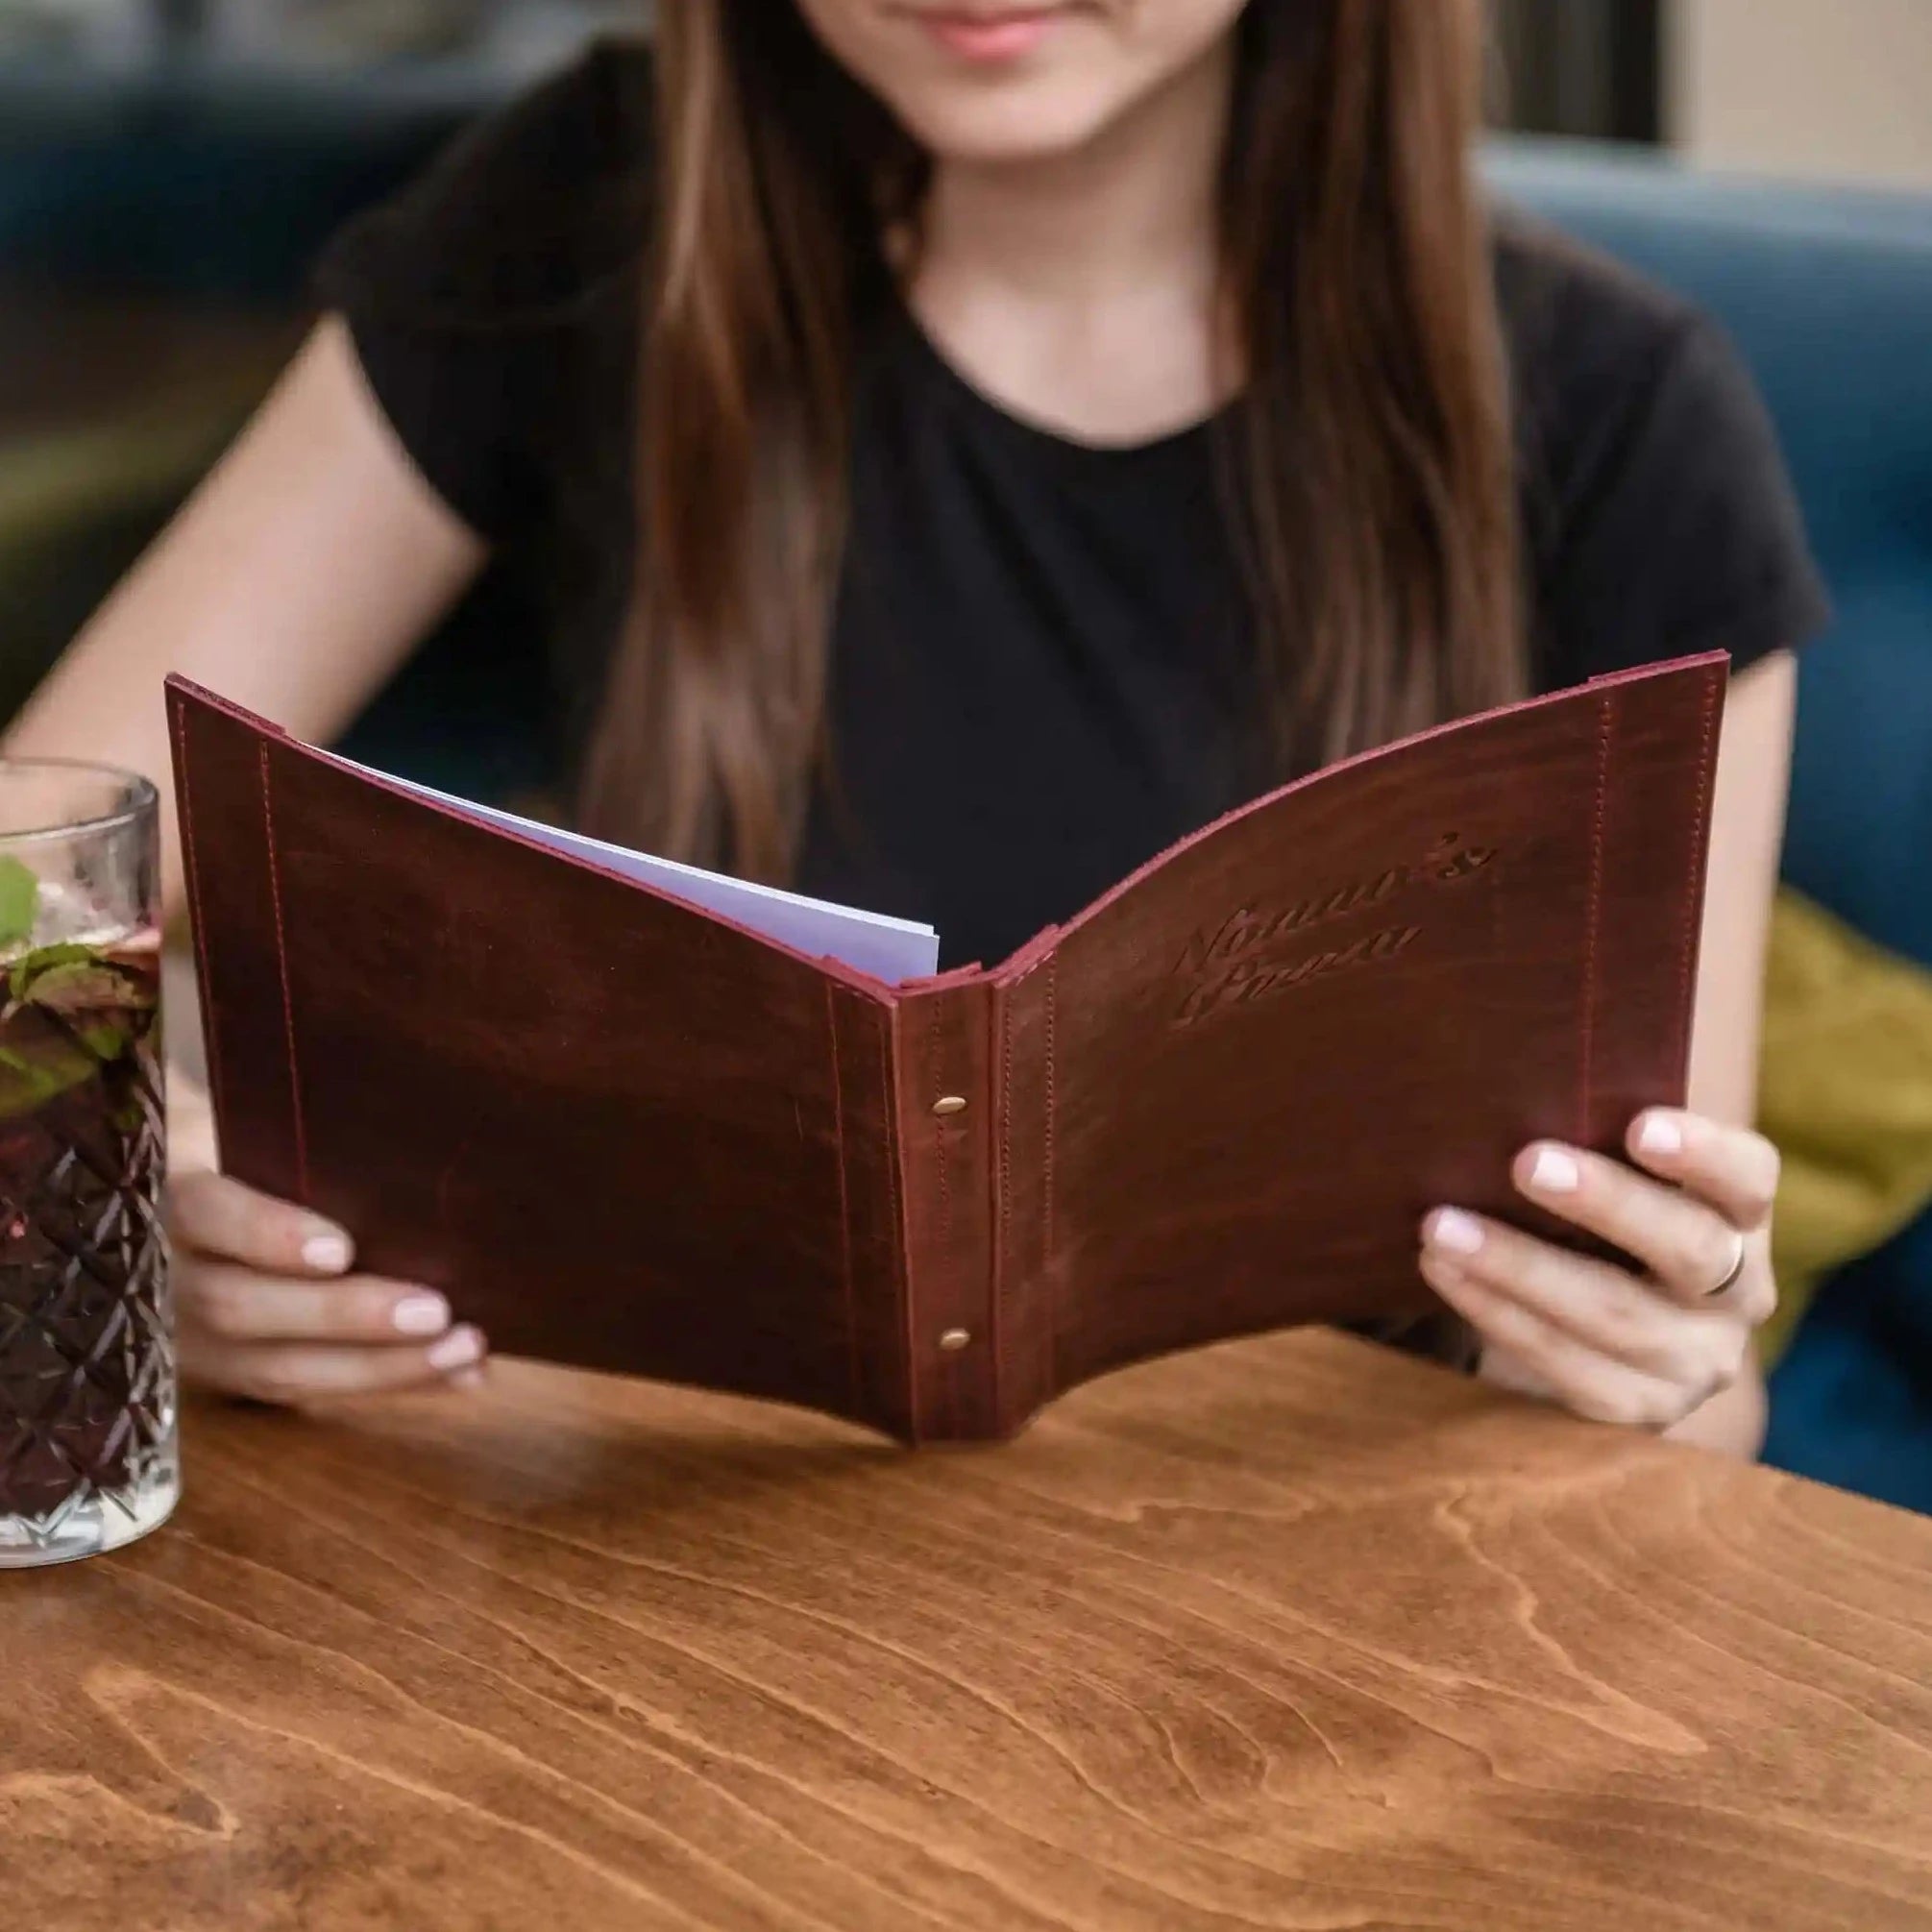 Add a unique flair to your dining experience with our custom leather binder, designed for restaurant menus.